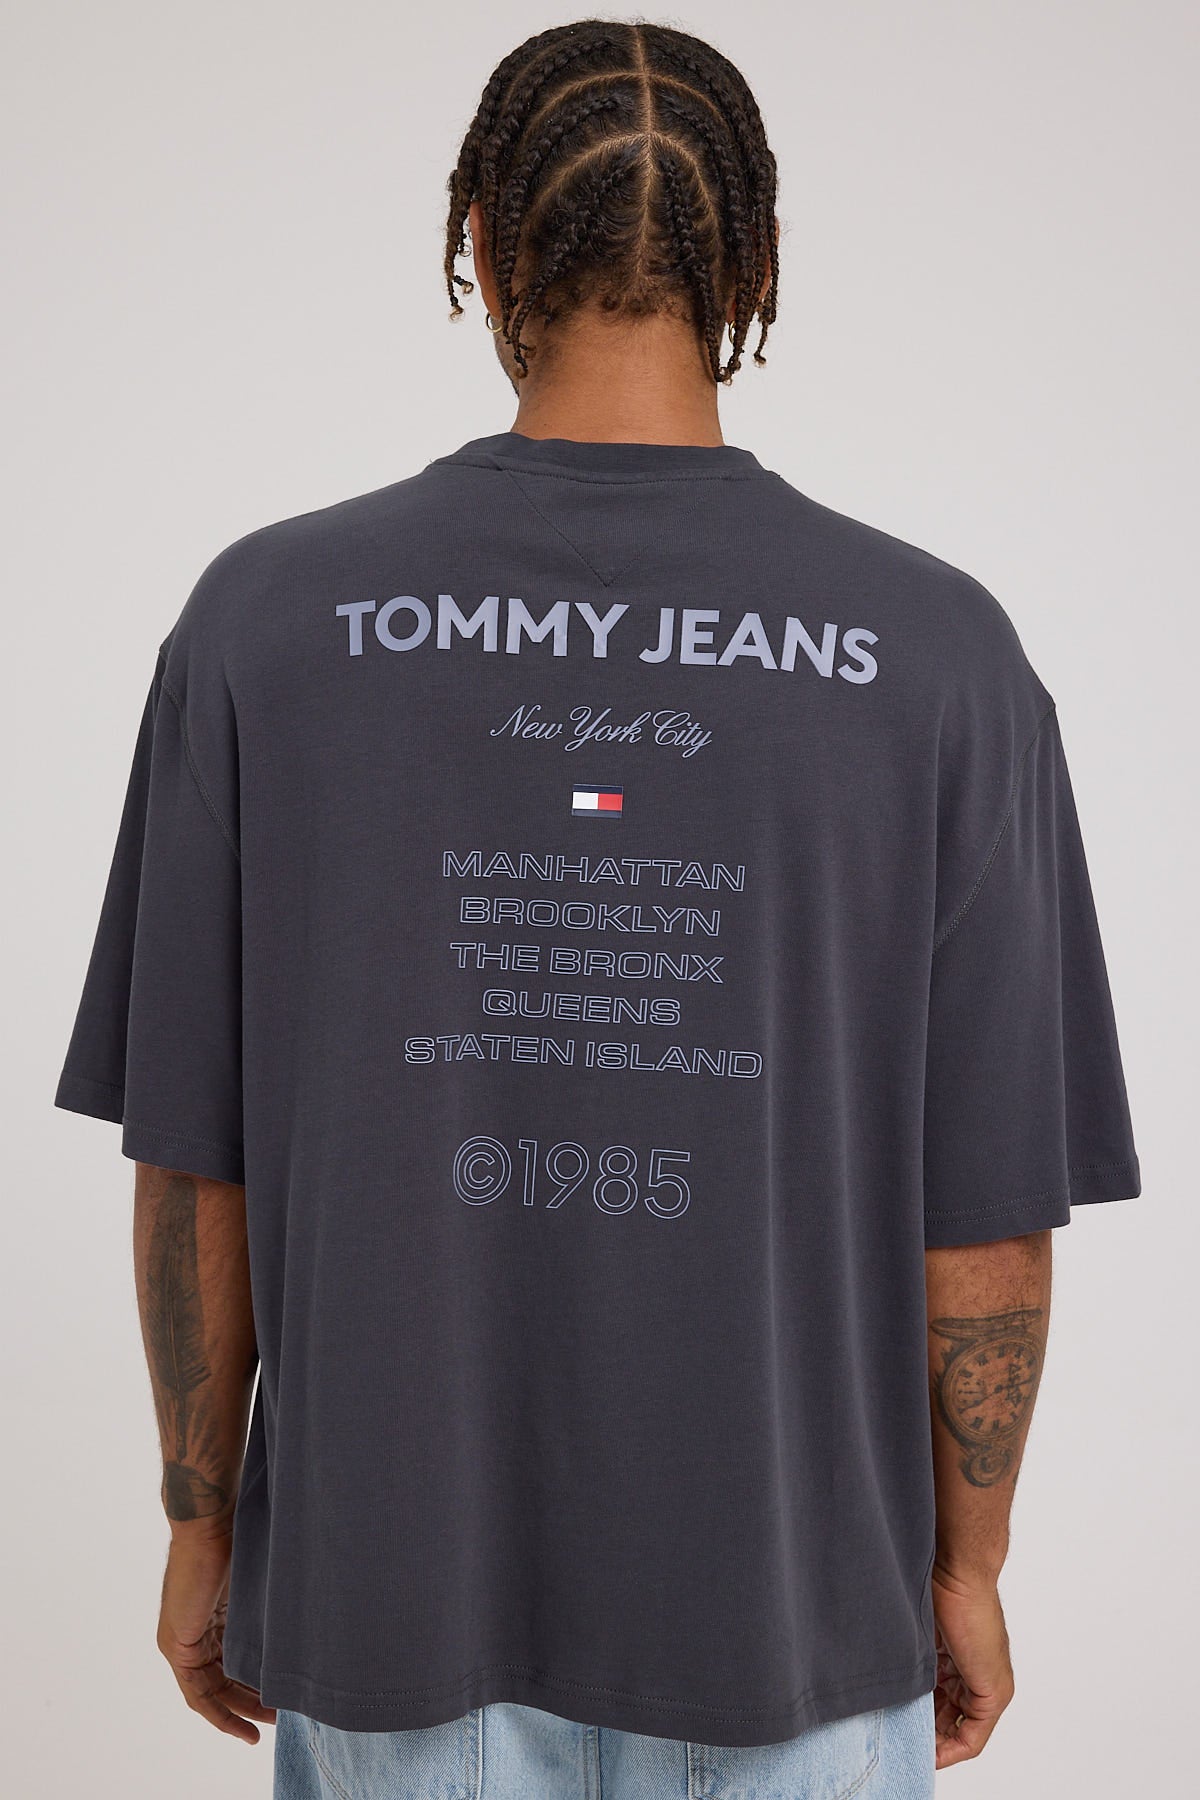 Tommy Jeans Oversized TJ NYC 1985 Cities Tee New Charcoal